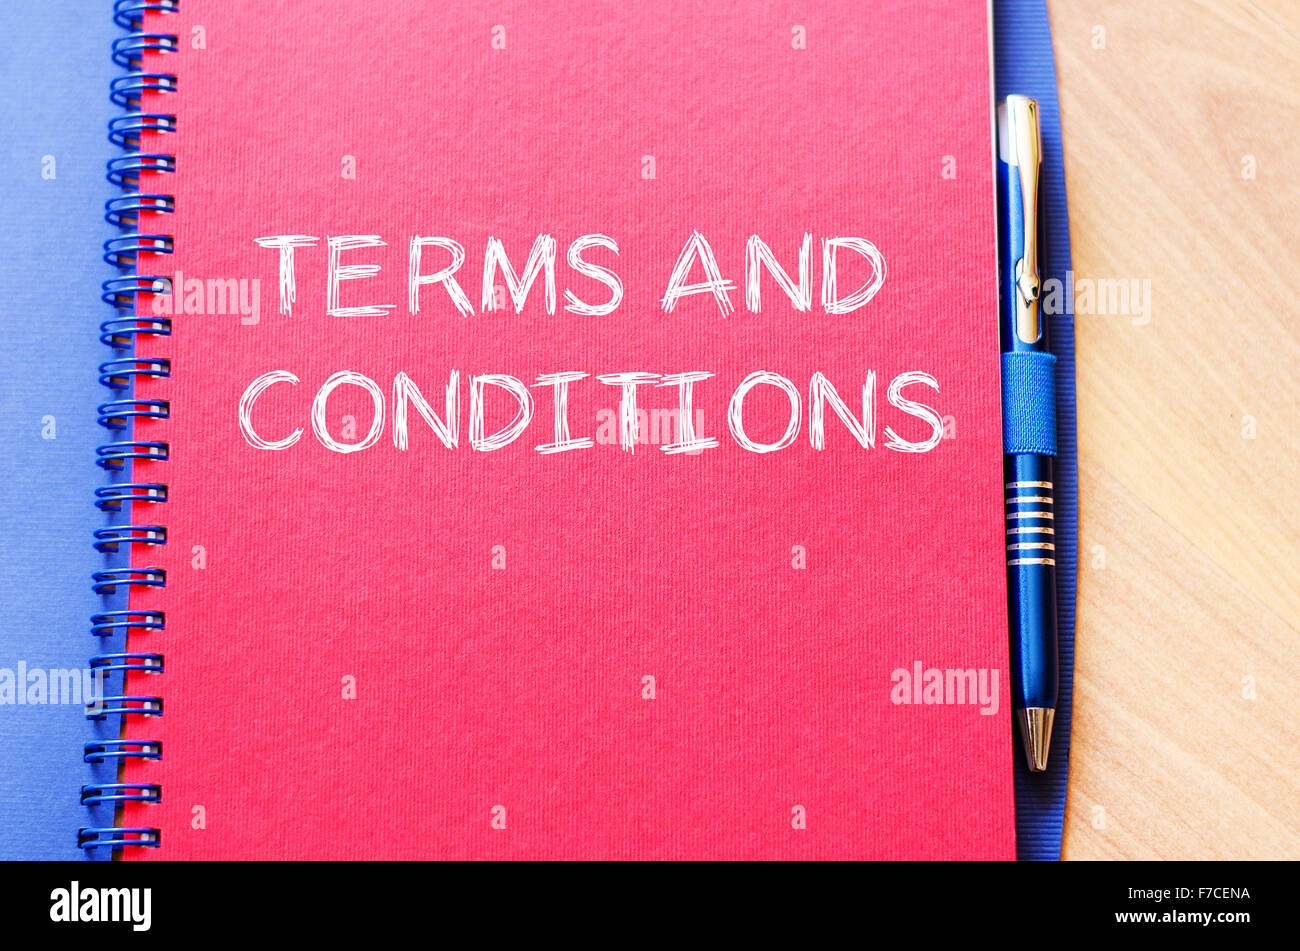 Terms and conditions text concept write on notebook with pen Stock Photo